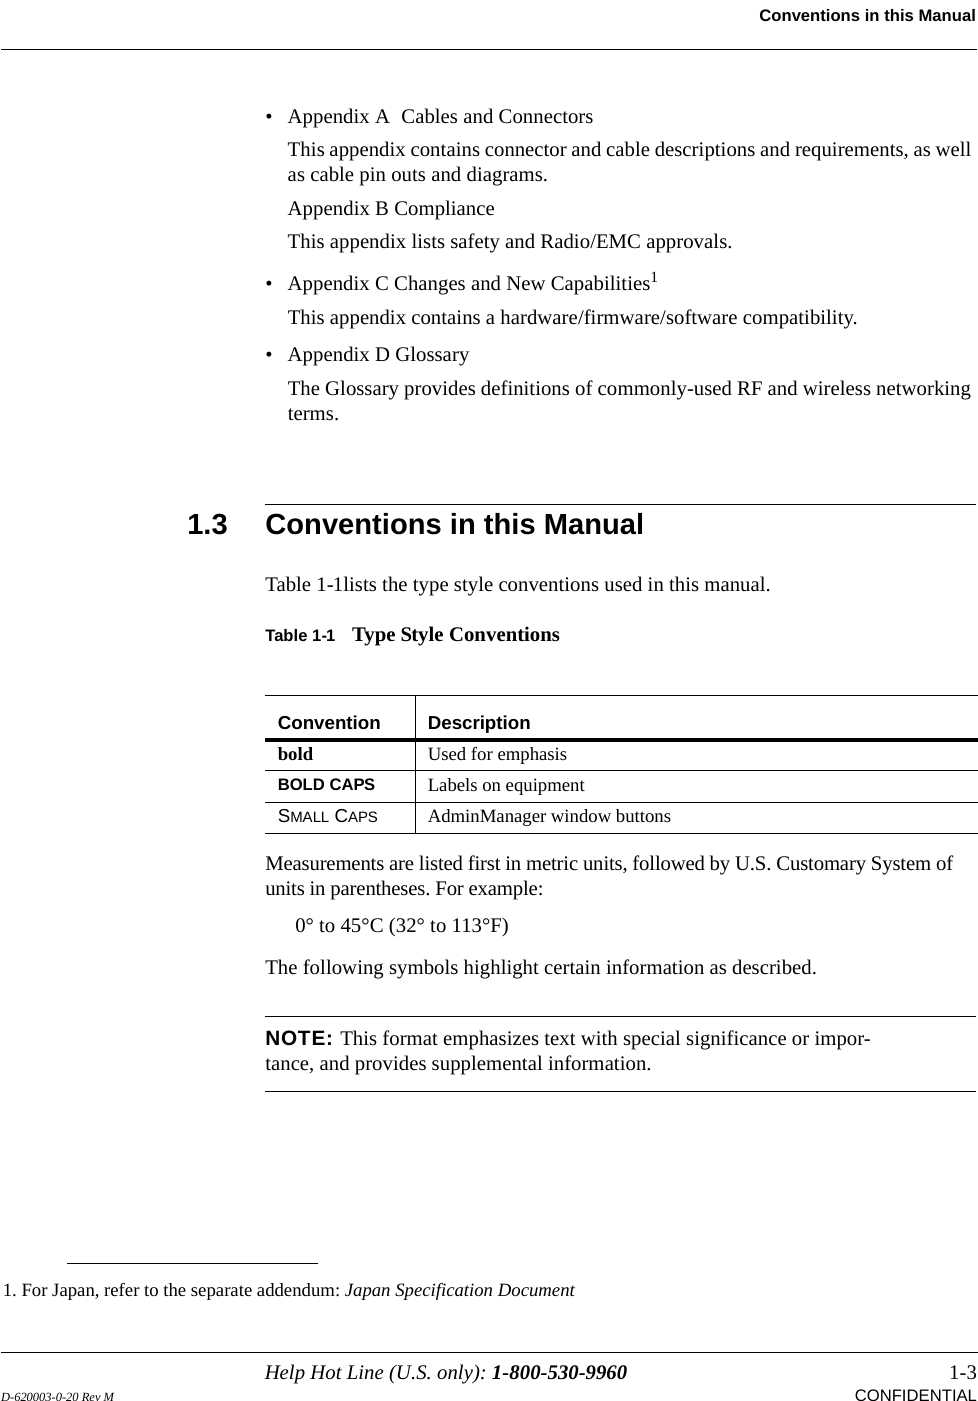 Help Hot Line (U.S. only): 1-800-530-9960 1-3D-620003-0-20 Rev M  CONFIDENTIALConventions in this Manual• Appendix A  Cables and ConnectorsThis appendix contains connector and cable descriptions and requirements, as well as cable pin outs and diagrams.Appendix B ComplianceThis appendix lists safety and Radio/EMC approvals.• Appendix C Changes and New Capabilities1This appendix contains a hardware/firmware/software compatibility.• Appendix D GlossaryThe Glossary provides definitions of commonly-used RF and wireless networking terms.1.3 Conventions in this ManualTable 1-1lists the type style conventions used in this manual.Table 1-1 Type Style ConventionsMeasurements are listed first in metric units, followed by U.S. Customary System of units in parentheses. For example:0° to 45°C (32° to 113°F)The following symbols highlight certain information as described.NOTE: This format emphasizes text with special significance or impor-tance, and provides supplemental information.1. For Japan, refer to the separate addendum: Japan Specification DocumentConvention Descriptionbold Used for emphasisBOLD CAPS Labels on equipmentSMALL CAPS AdminManager window buttons